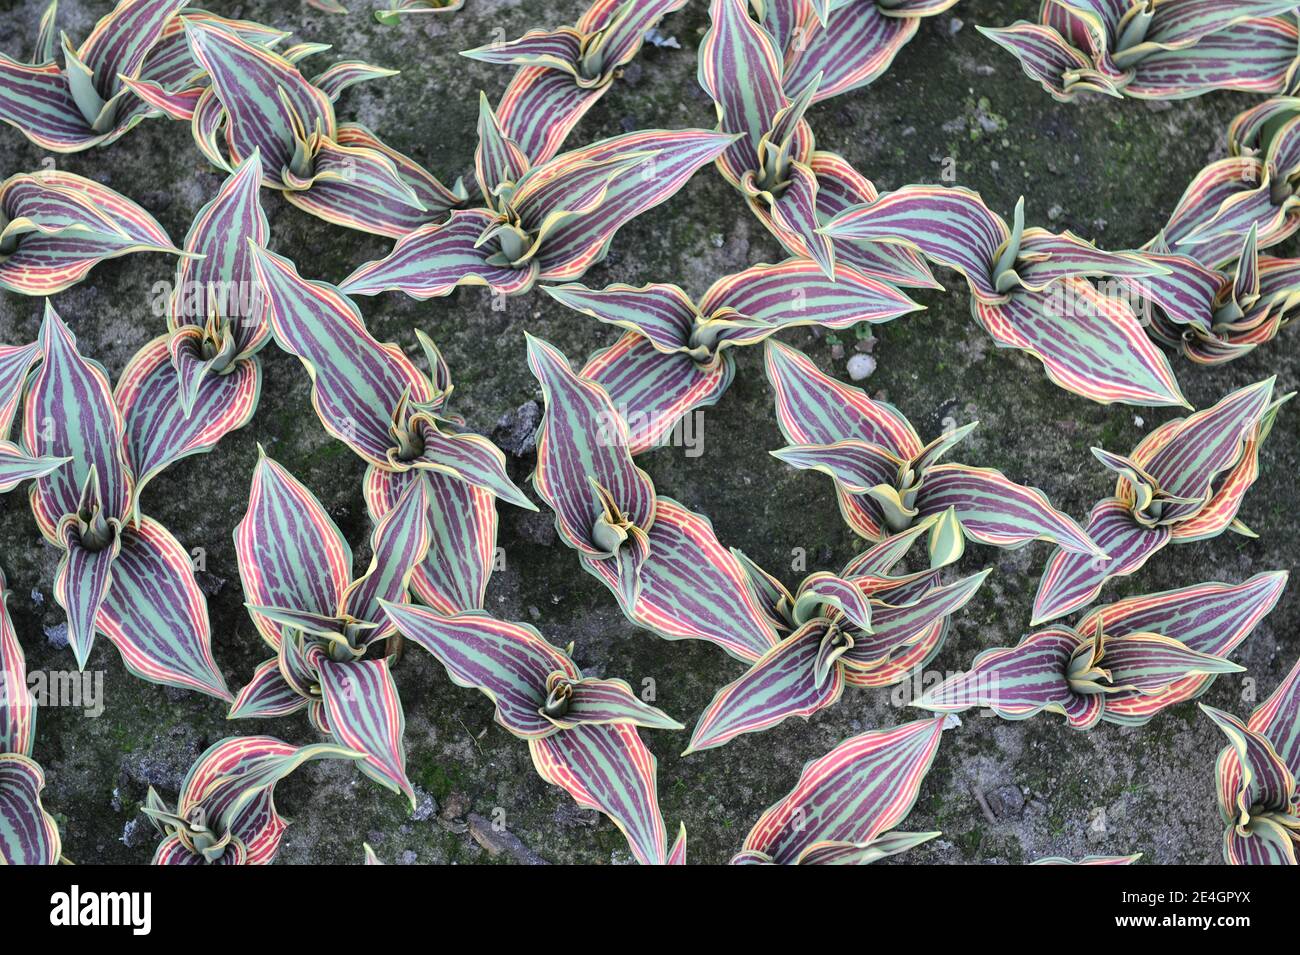 Variegated leaves of Greigii tulips (Tulipa) Fire of Love in a garden in March Stock Photo